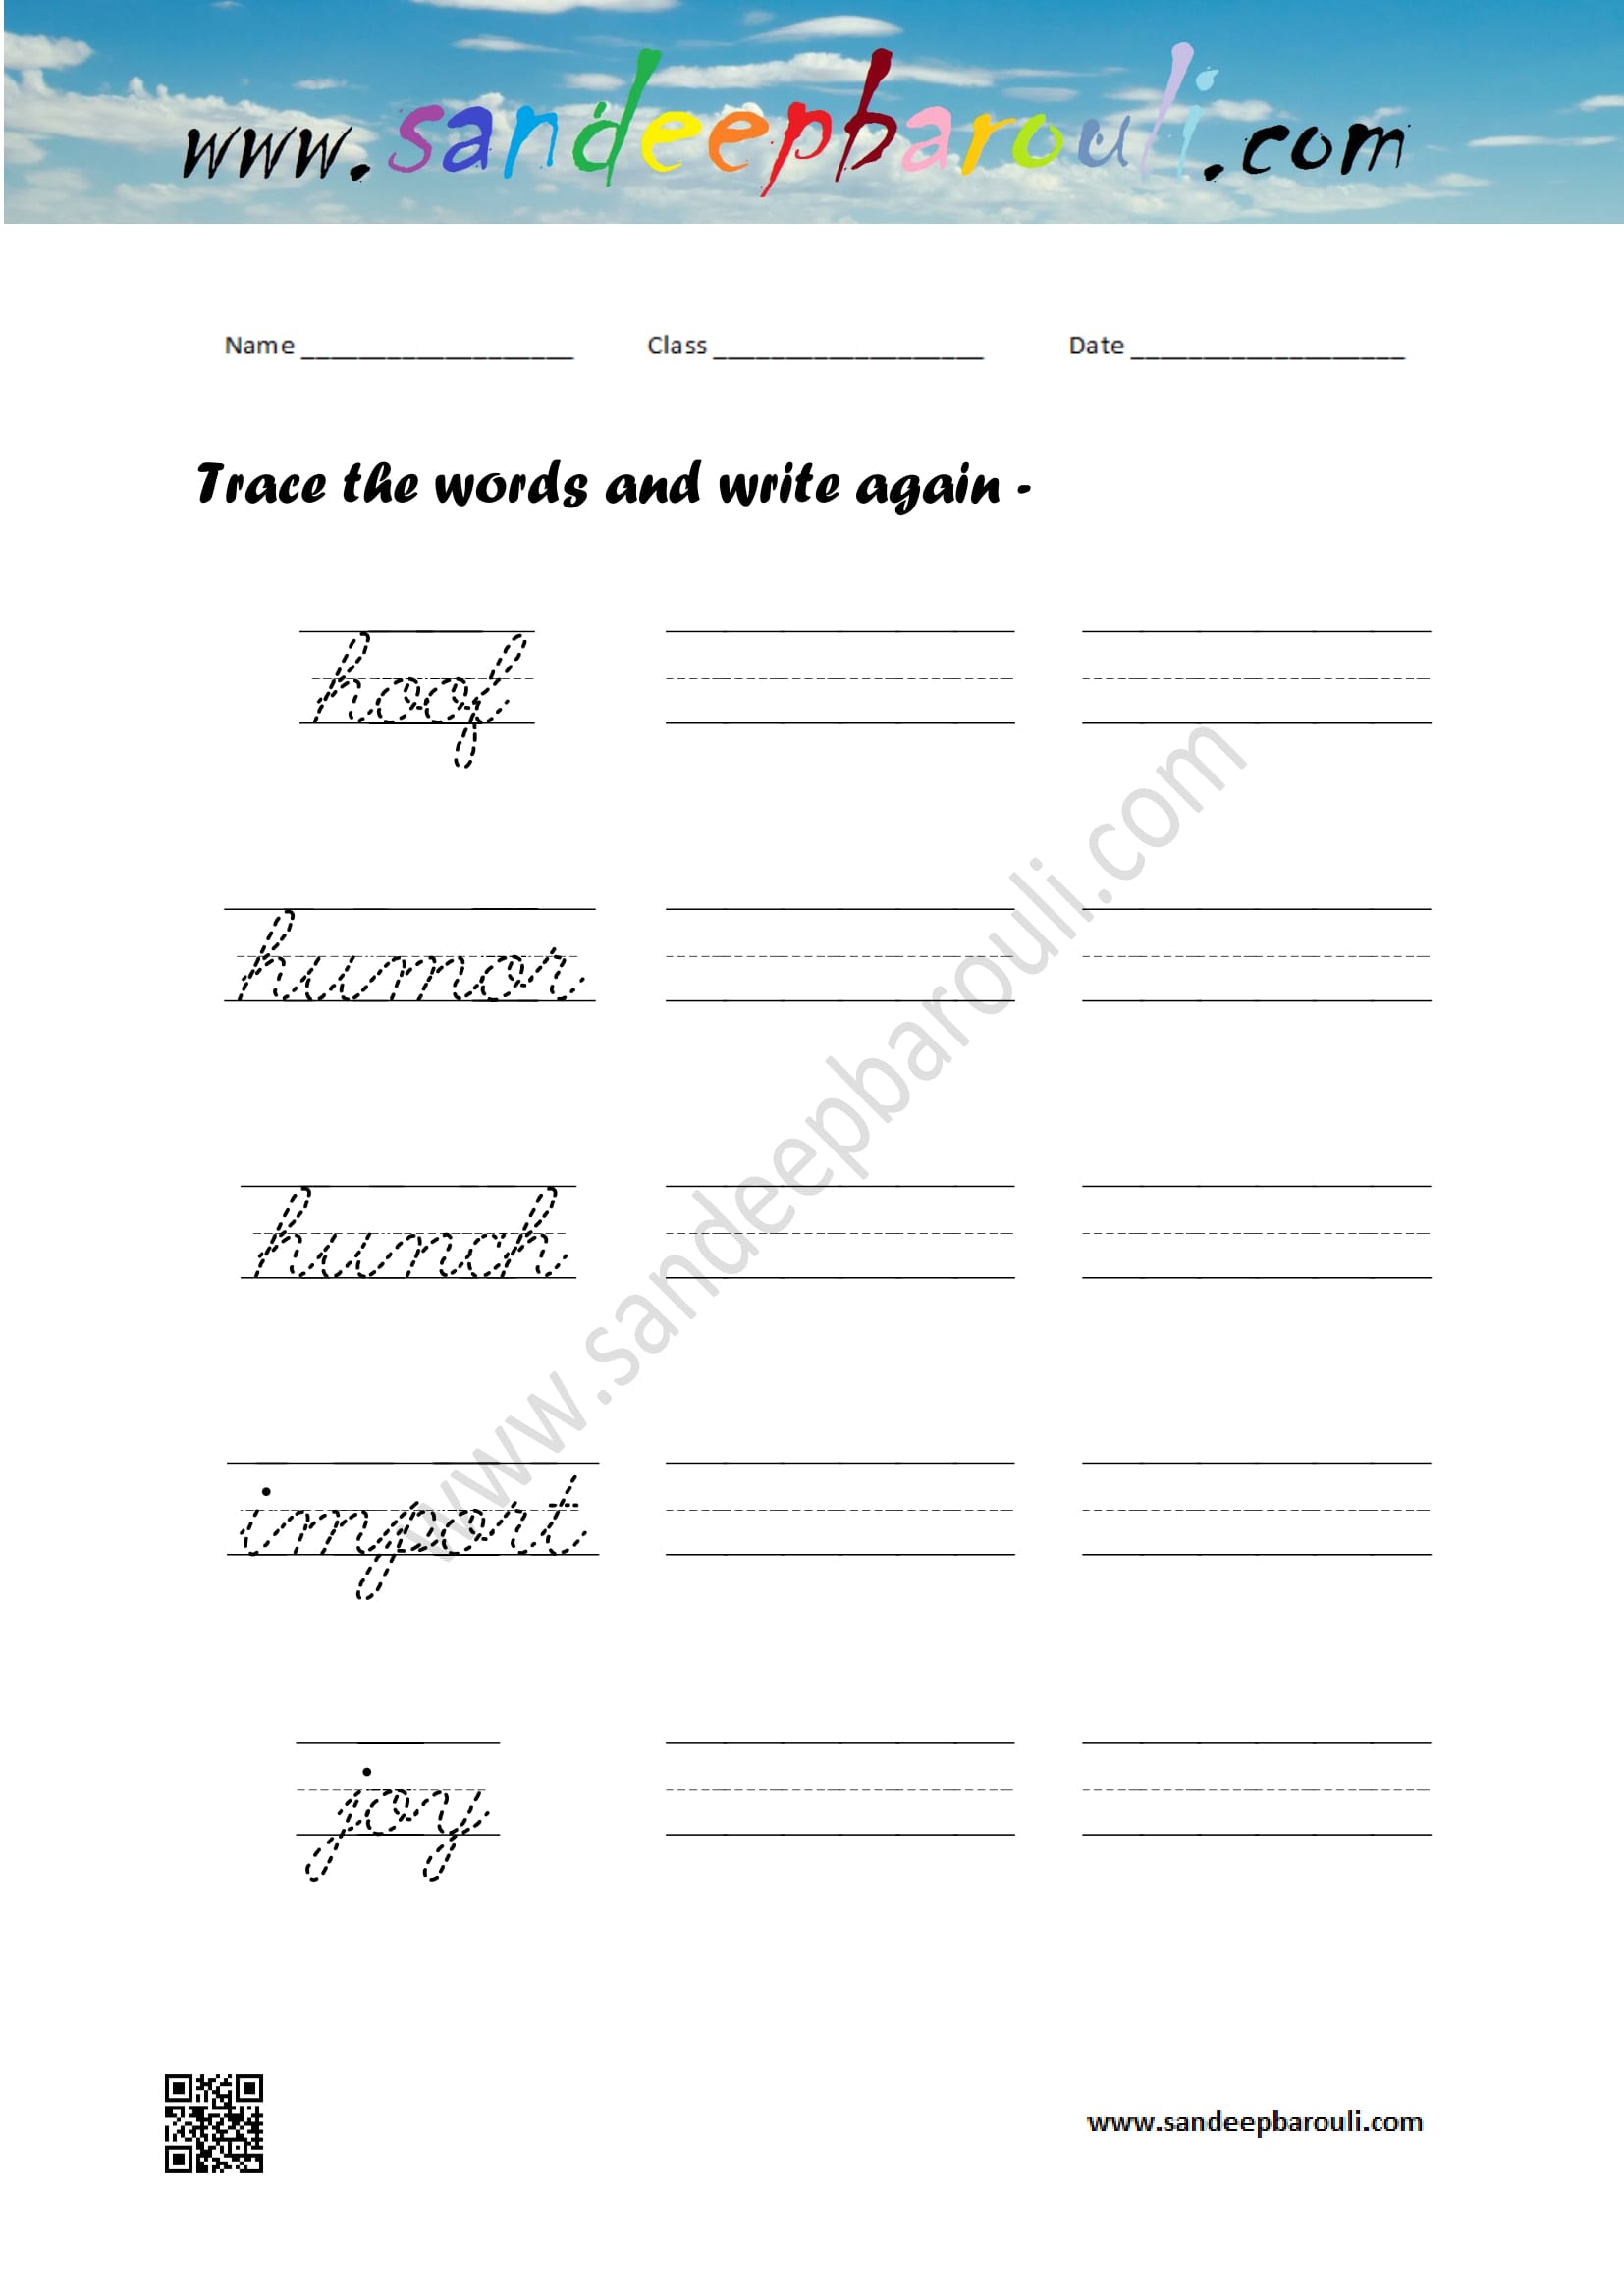 Cursive writing worksheet – trace the words and write again (98)